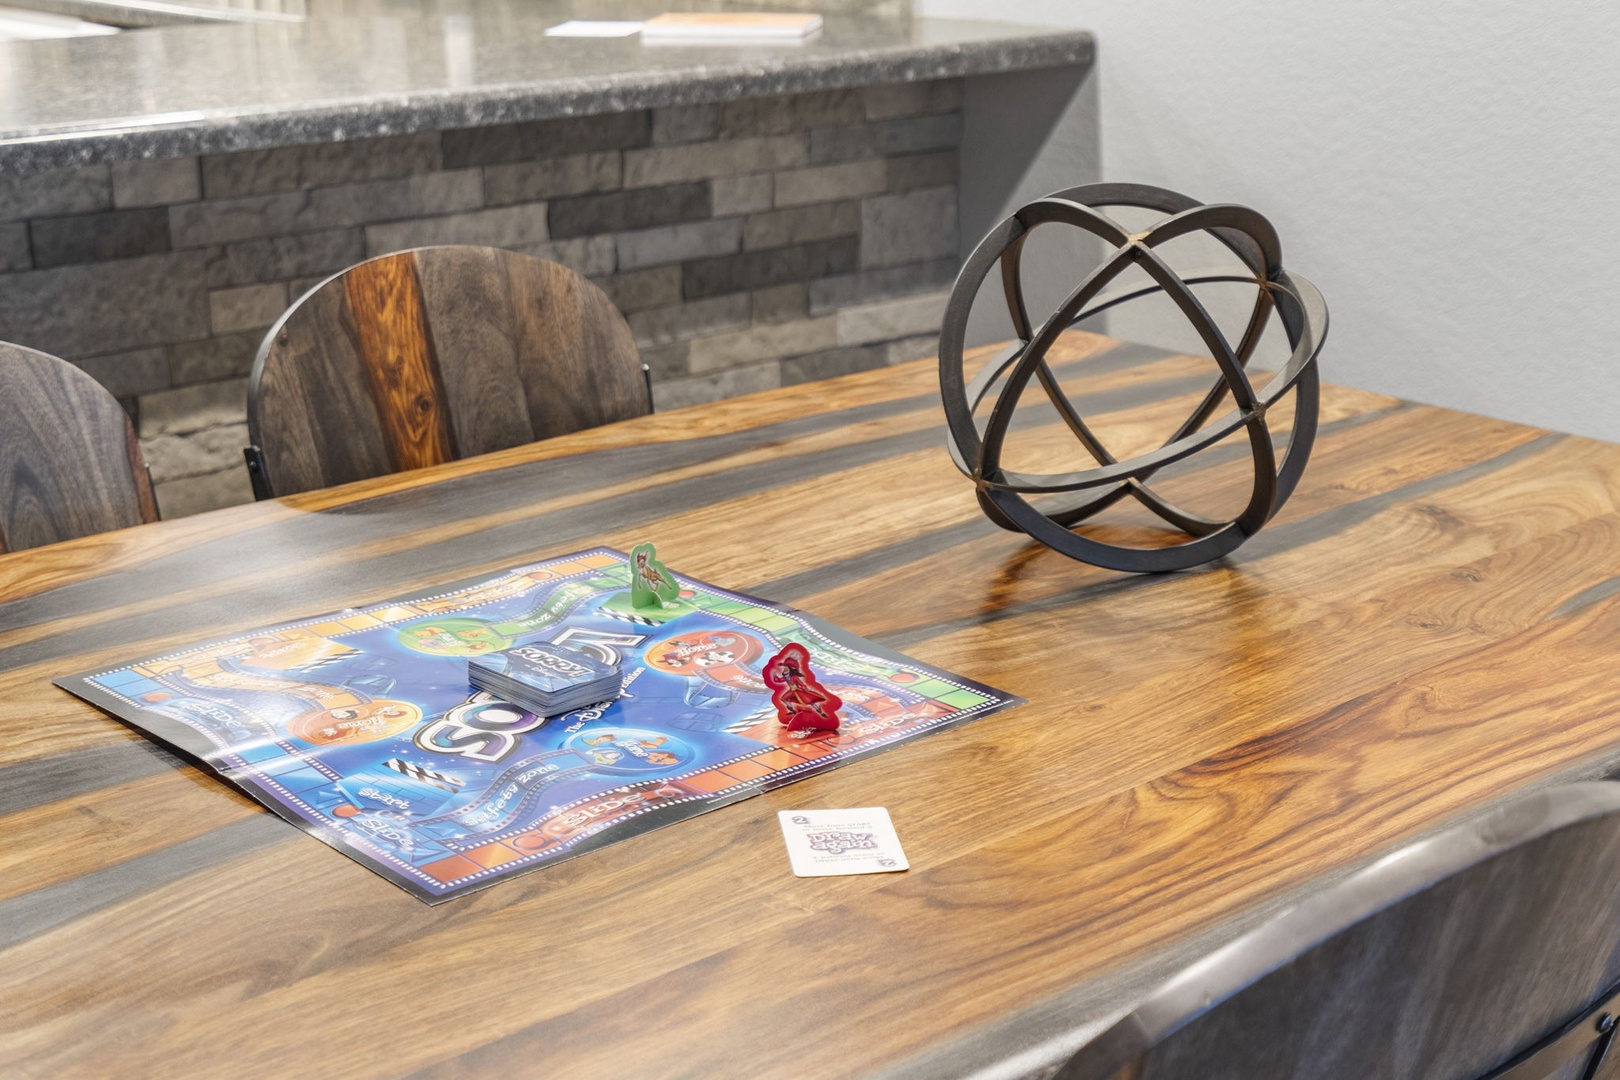 Break out the board games when you’re feeling competitive!